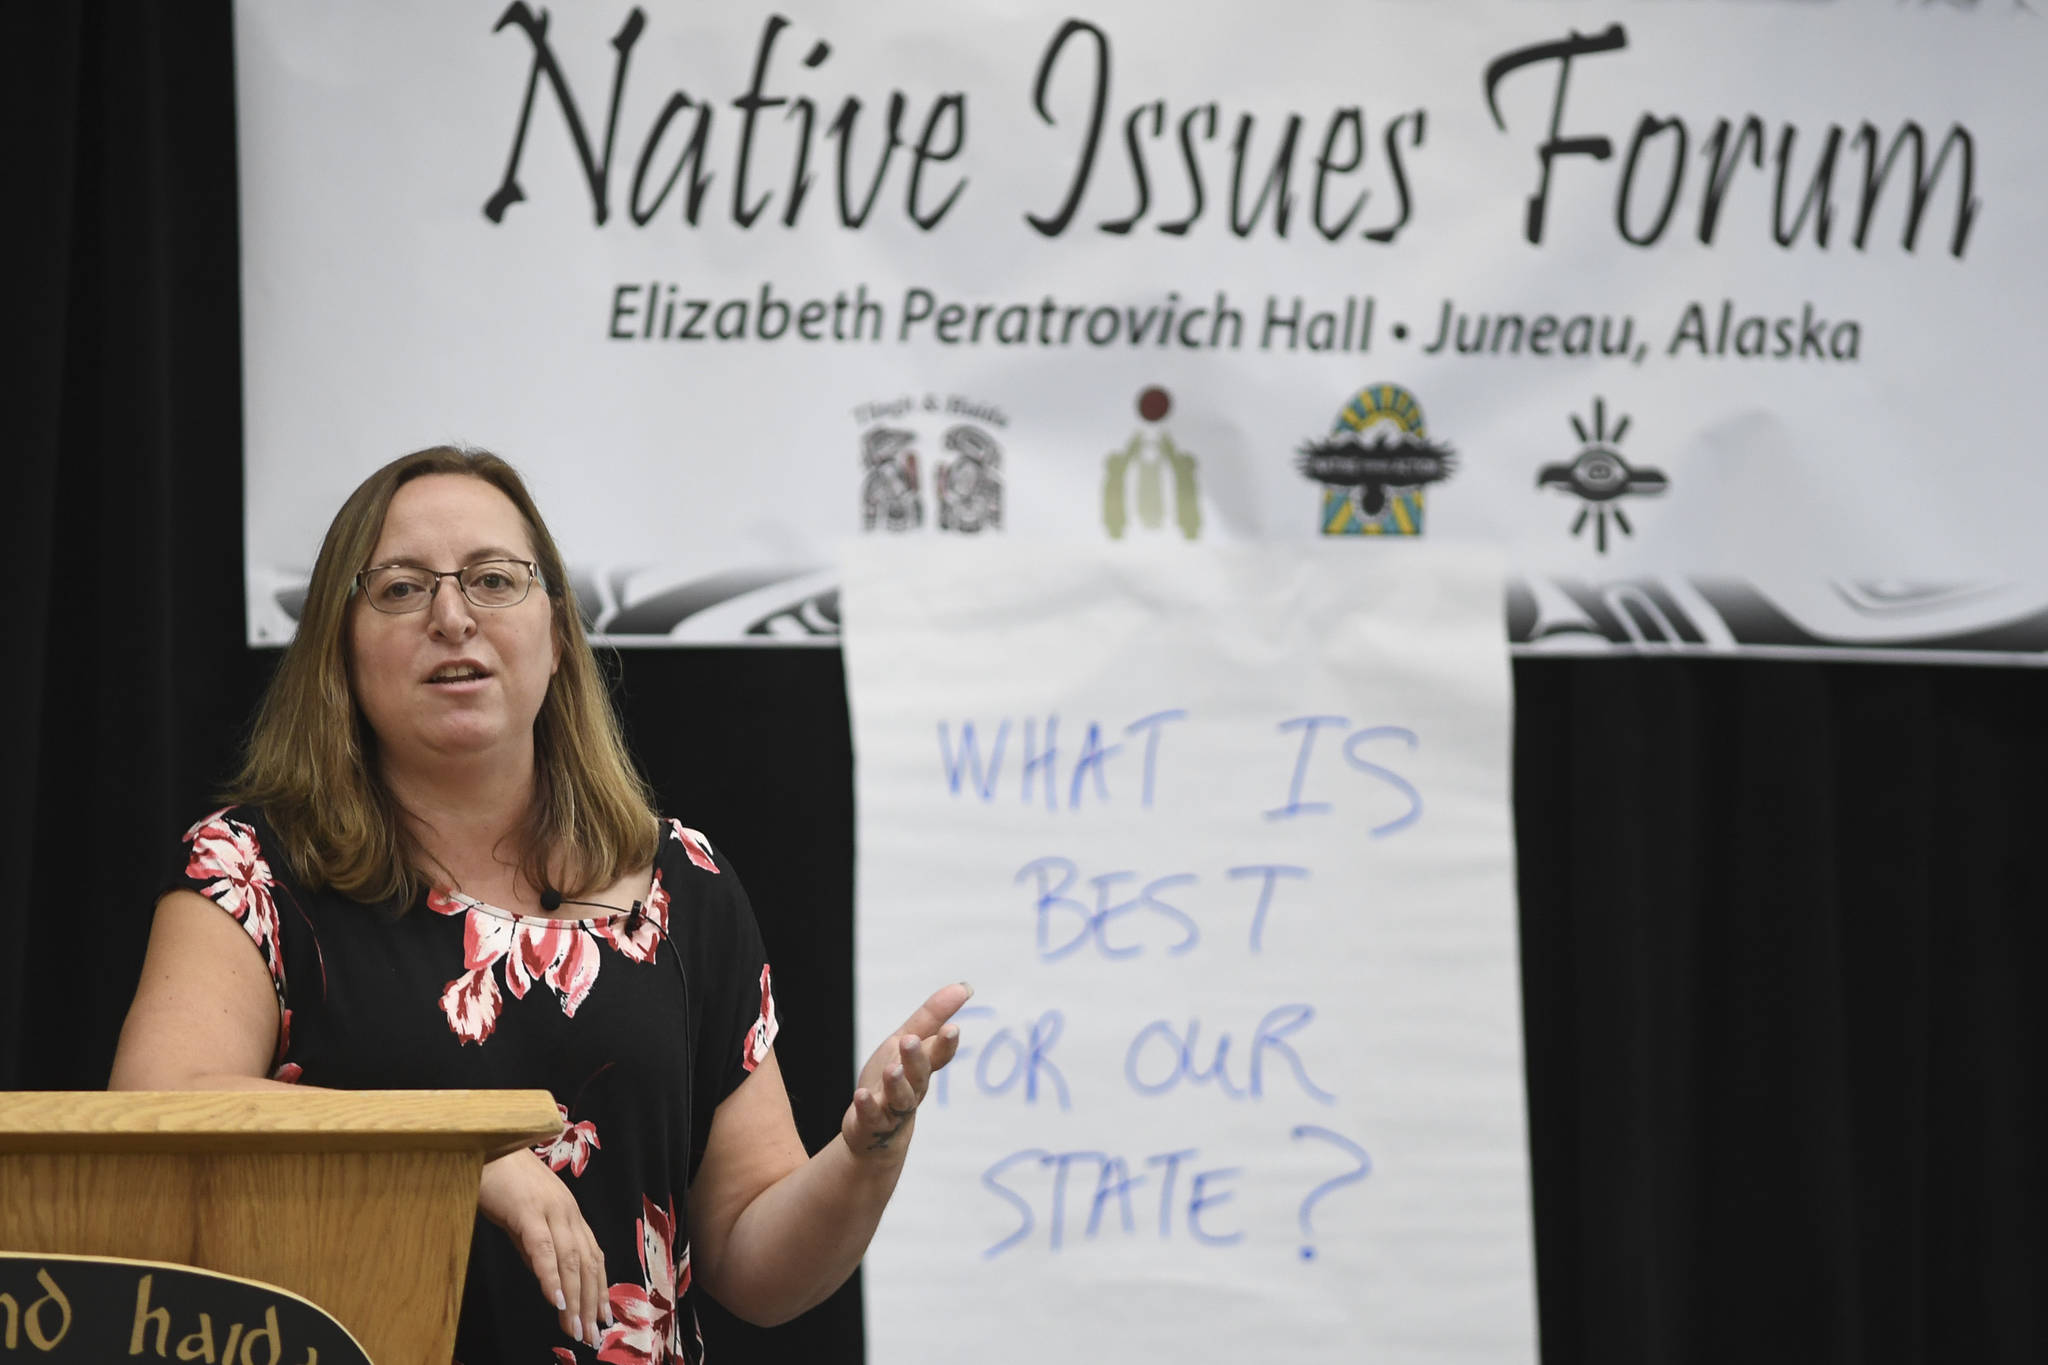 Melissa Borton, Tribal Administrator for the Native Village of Afognak, speaks during a Special Native Issues Forum at Elizabeth Peratrovich Hall on Tuesday, July 30, 2019. The forum was sponsored by Tlingit Haida, First Alaskans Institute, Native Peoples Action and Sealaska. (Michael Penn | Juneau Empire)